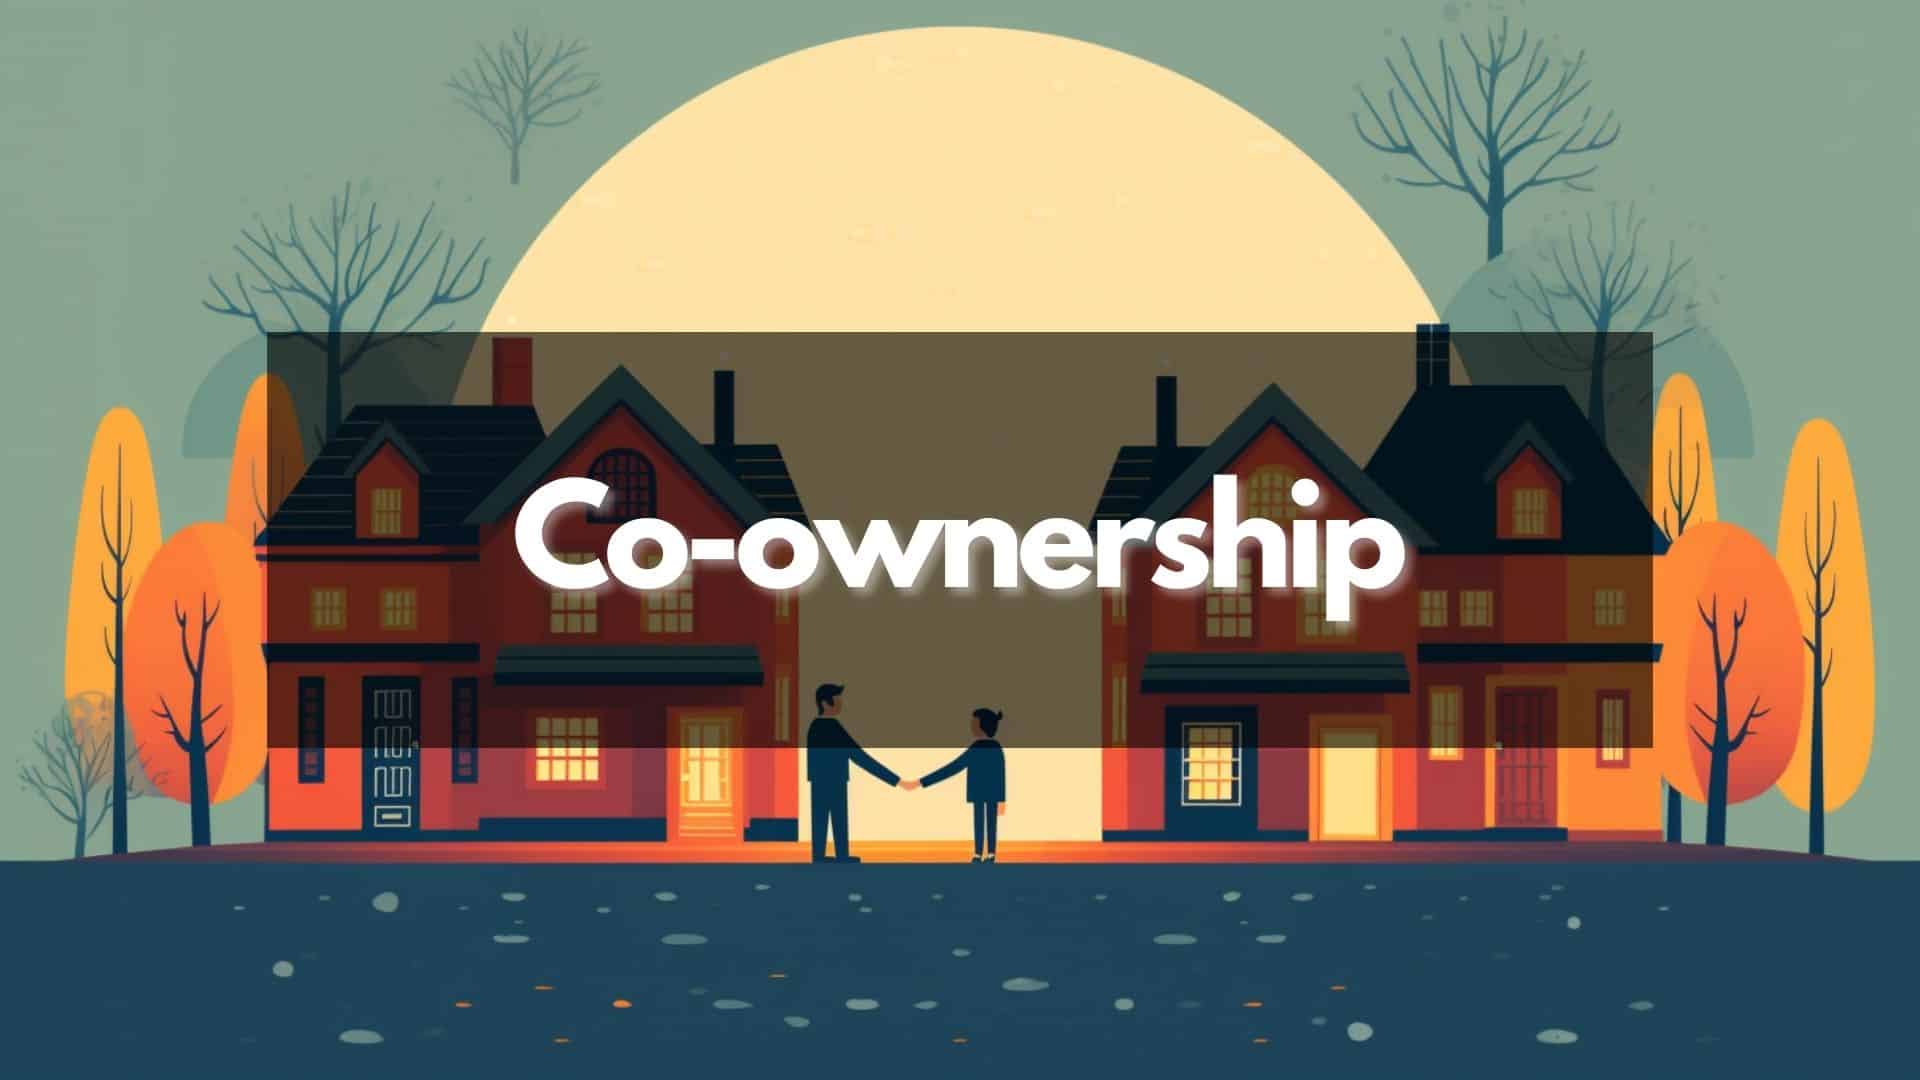 Co-ownership